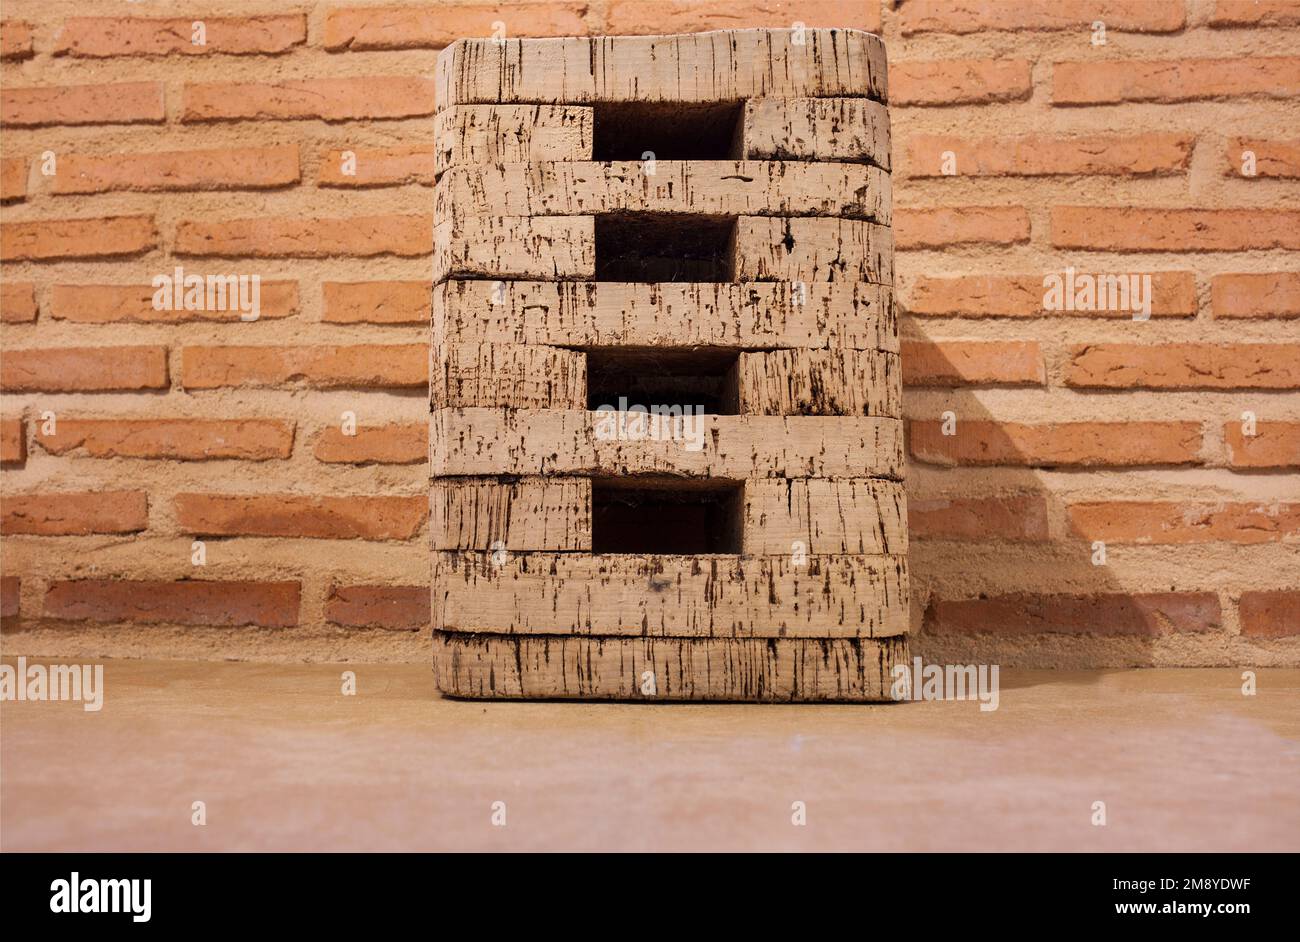 Stump stool made of cork also senton. Rustic home design from Extremadura, Spain Stock Photo